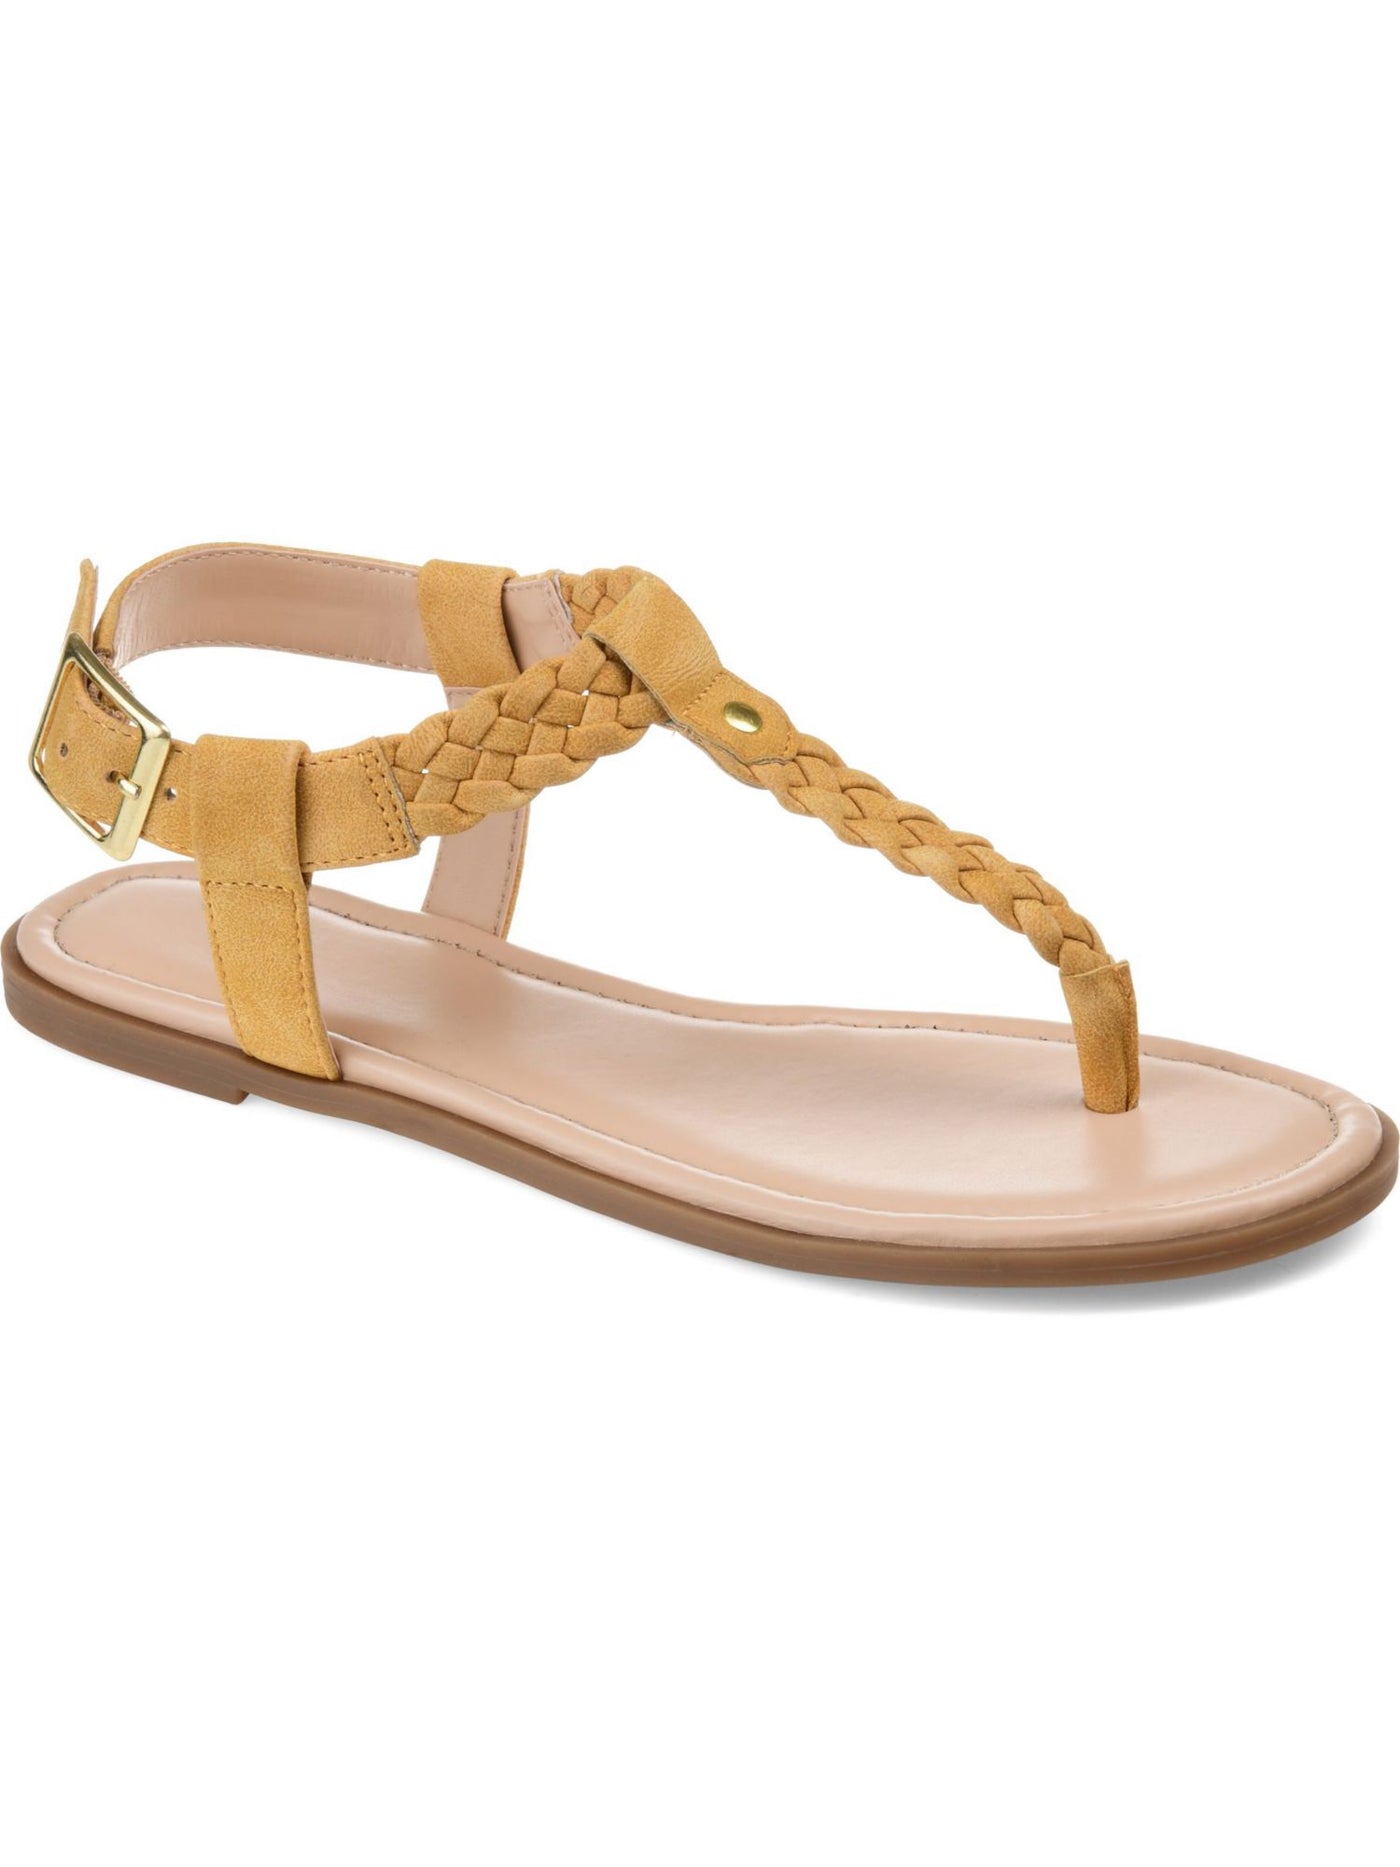 JOURNEE COLLECTION Womens Yellow Studded Buckle Accent Comfort T-Strap Genevive Round Toe Buckle Sandals Shoes 5.5